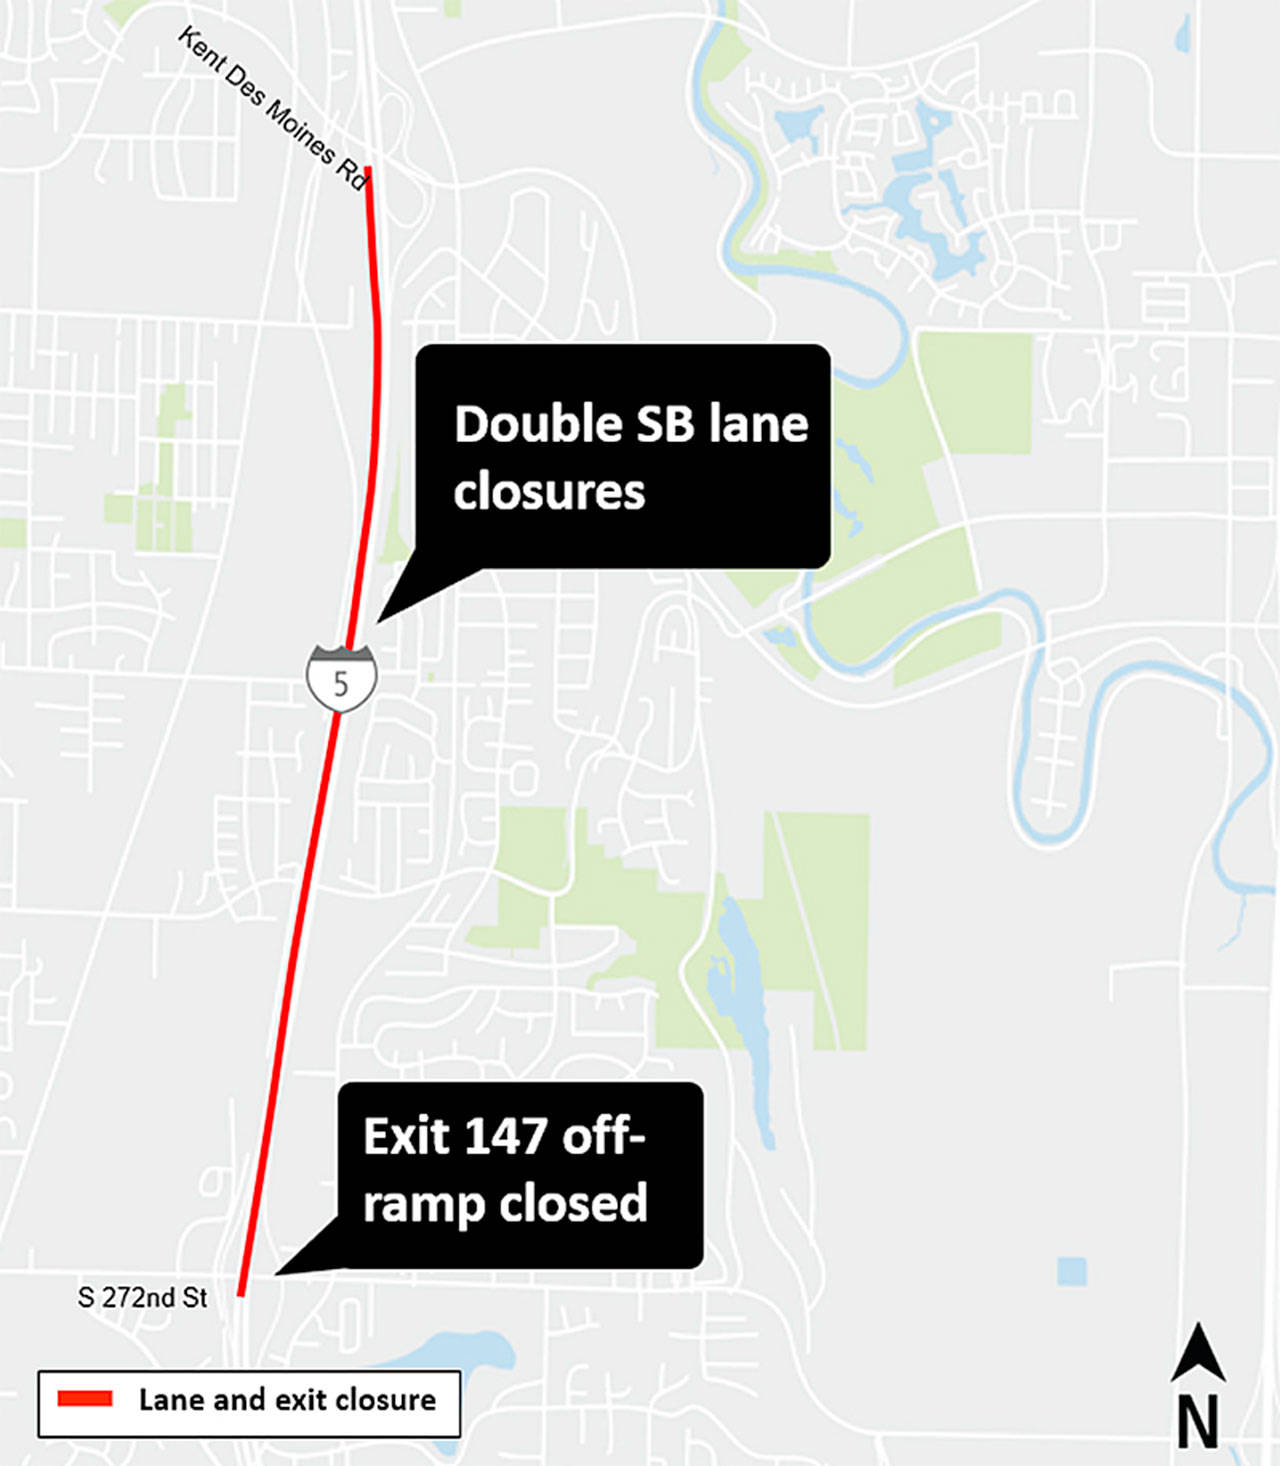 Two lanes of southbound I-5 from Kent Des Moines Road to South 272nd Street as well as the Exit 147 off-ramp will be closed for construction from 9 p.m. to 6 a.m. on Sept. 3, 8 and 9. COURTESY GRAPHIC, Sound Transit